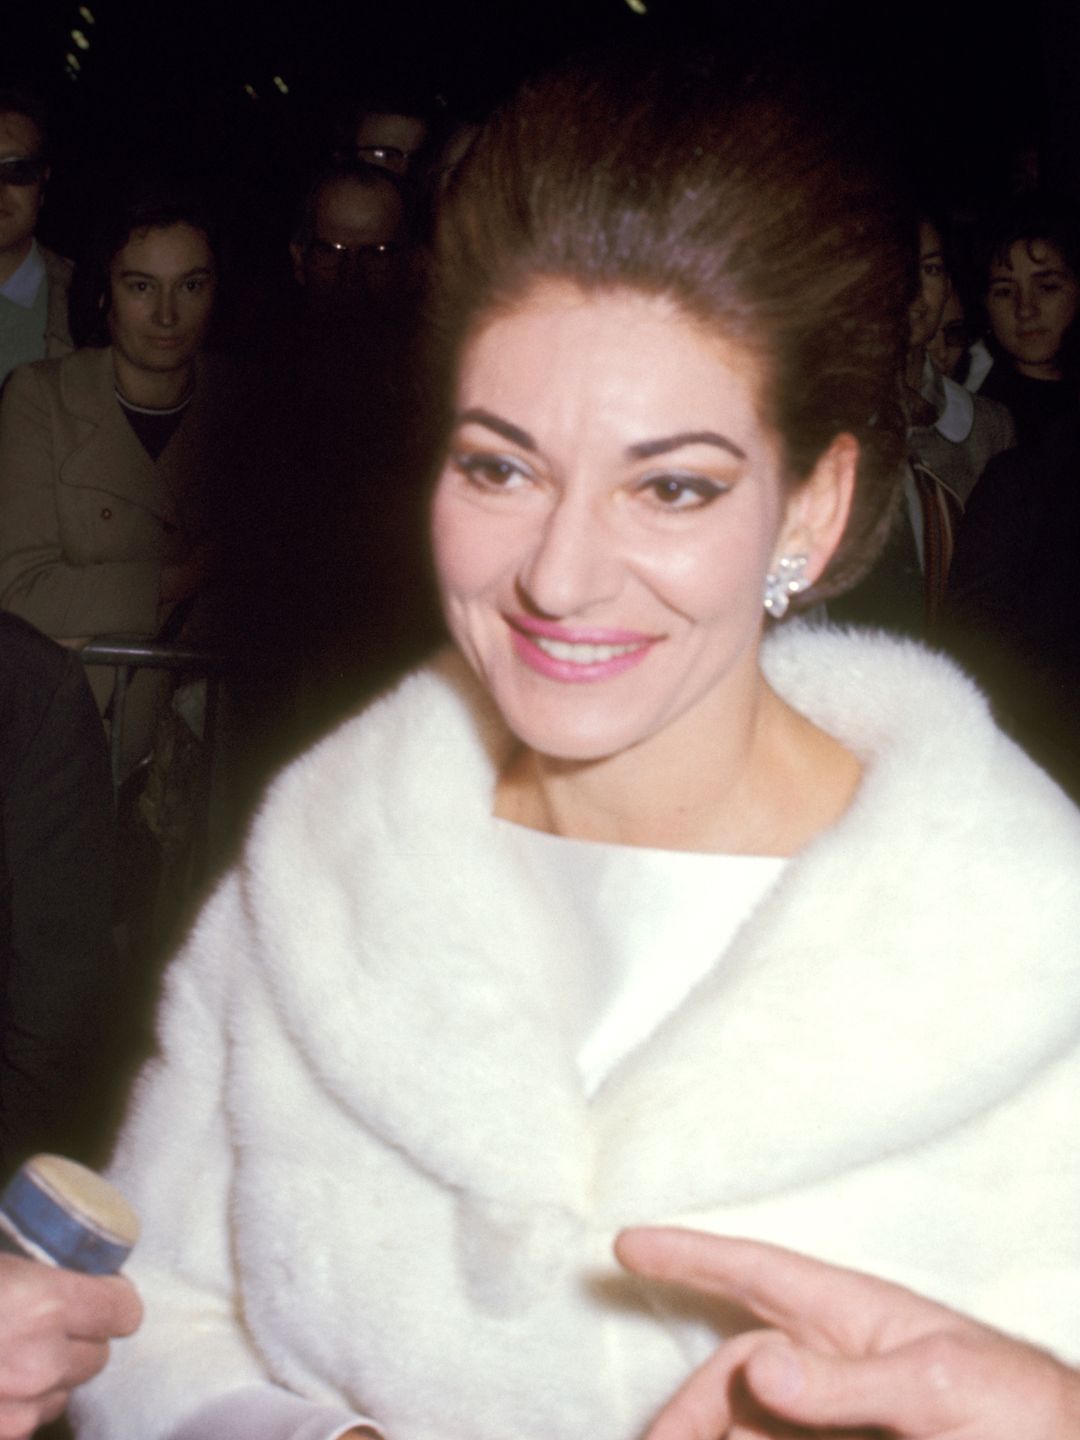 PARIS, FRANCE - OCTOBER 18:  Actress Maria Callas attends the premiere of "A Flea In Her Ear" on October 18, 1968 at the Marigny Theater in Paris, France. (Photo by Ron Galella/Ron Galella Collection via Getty Images)